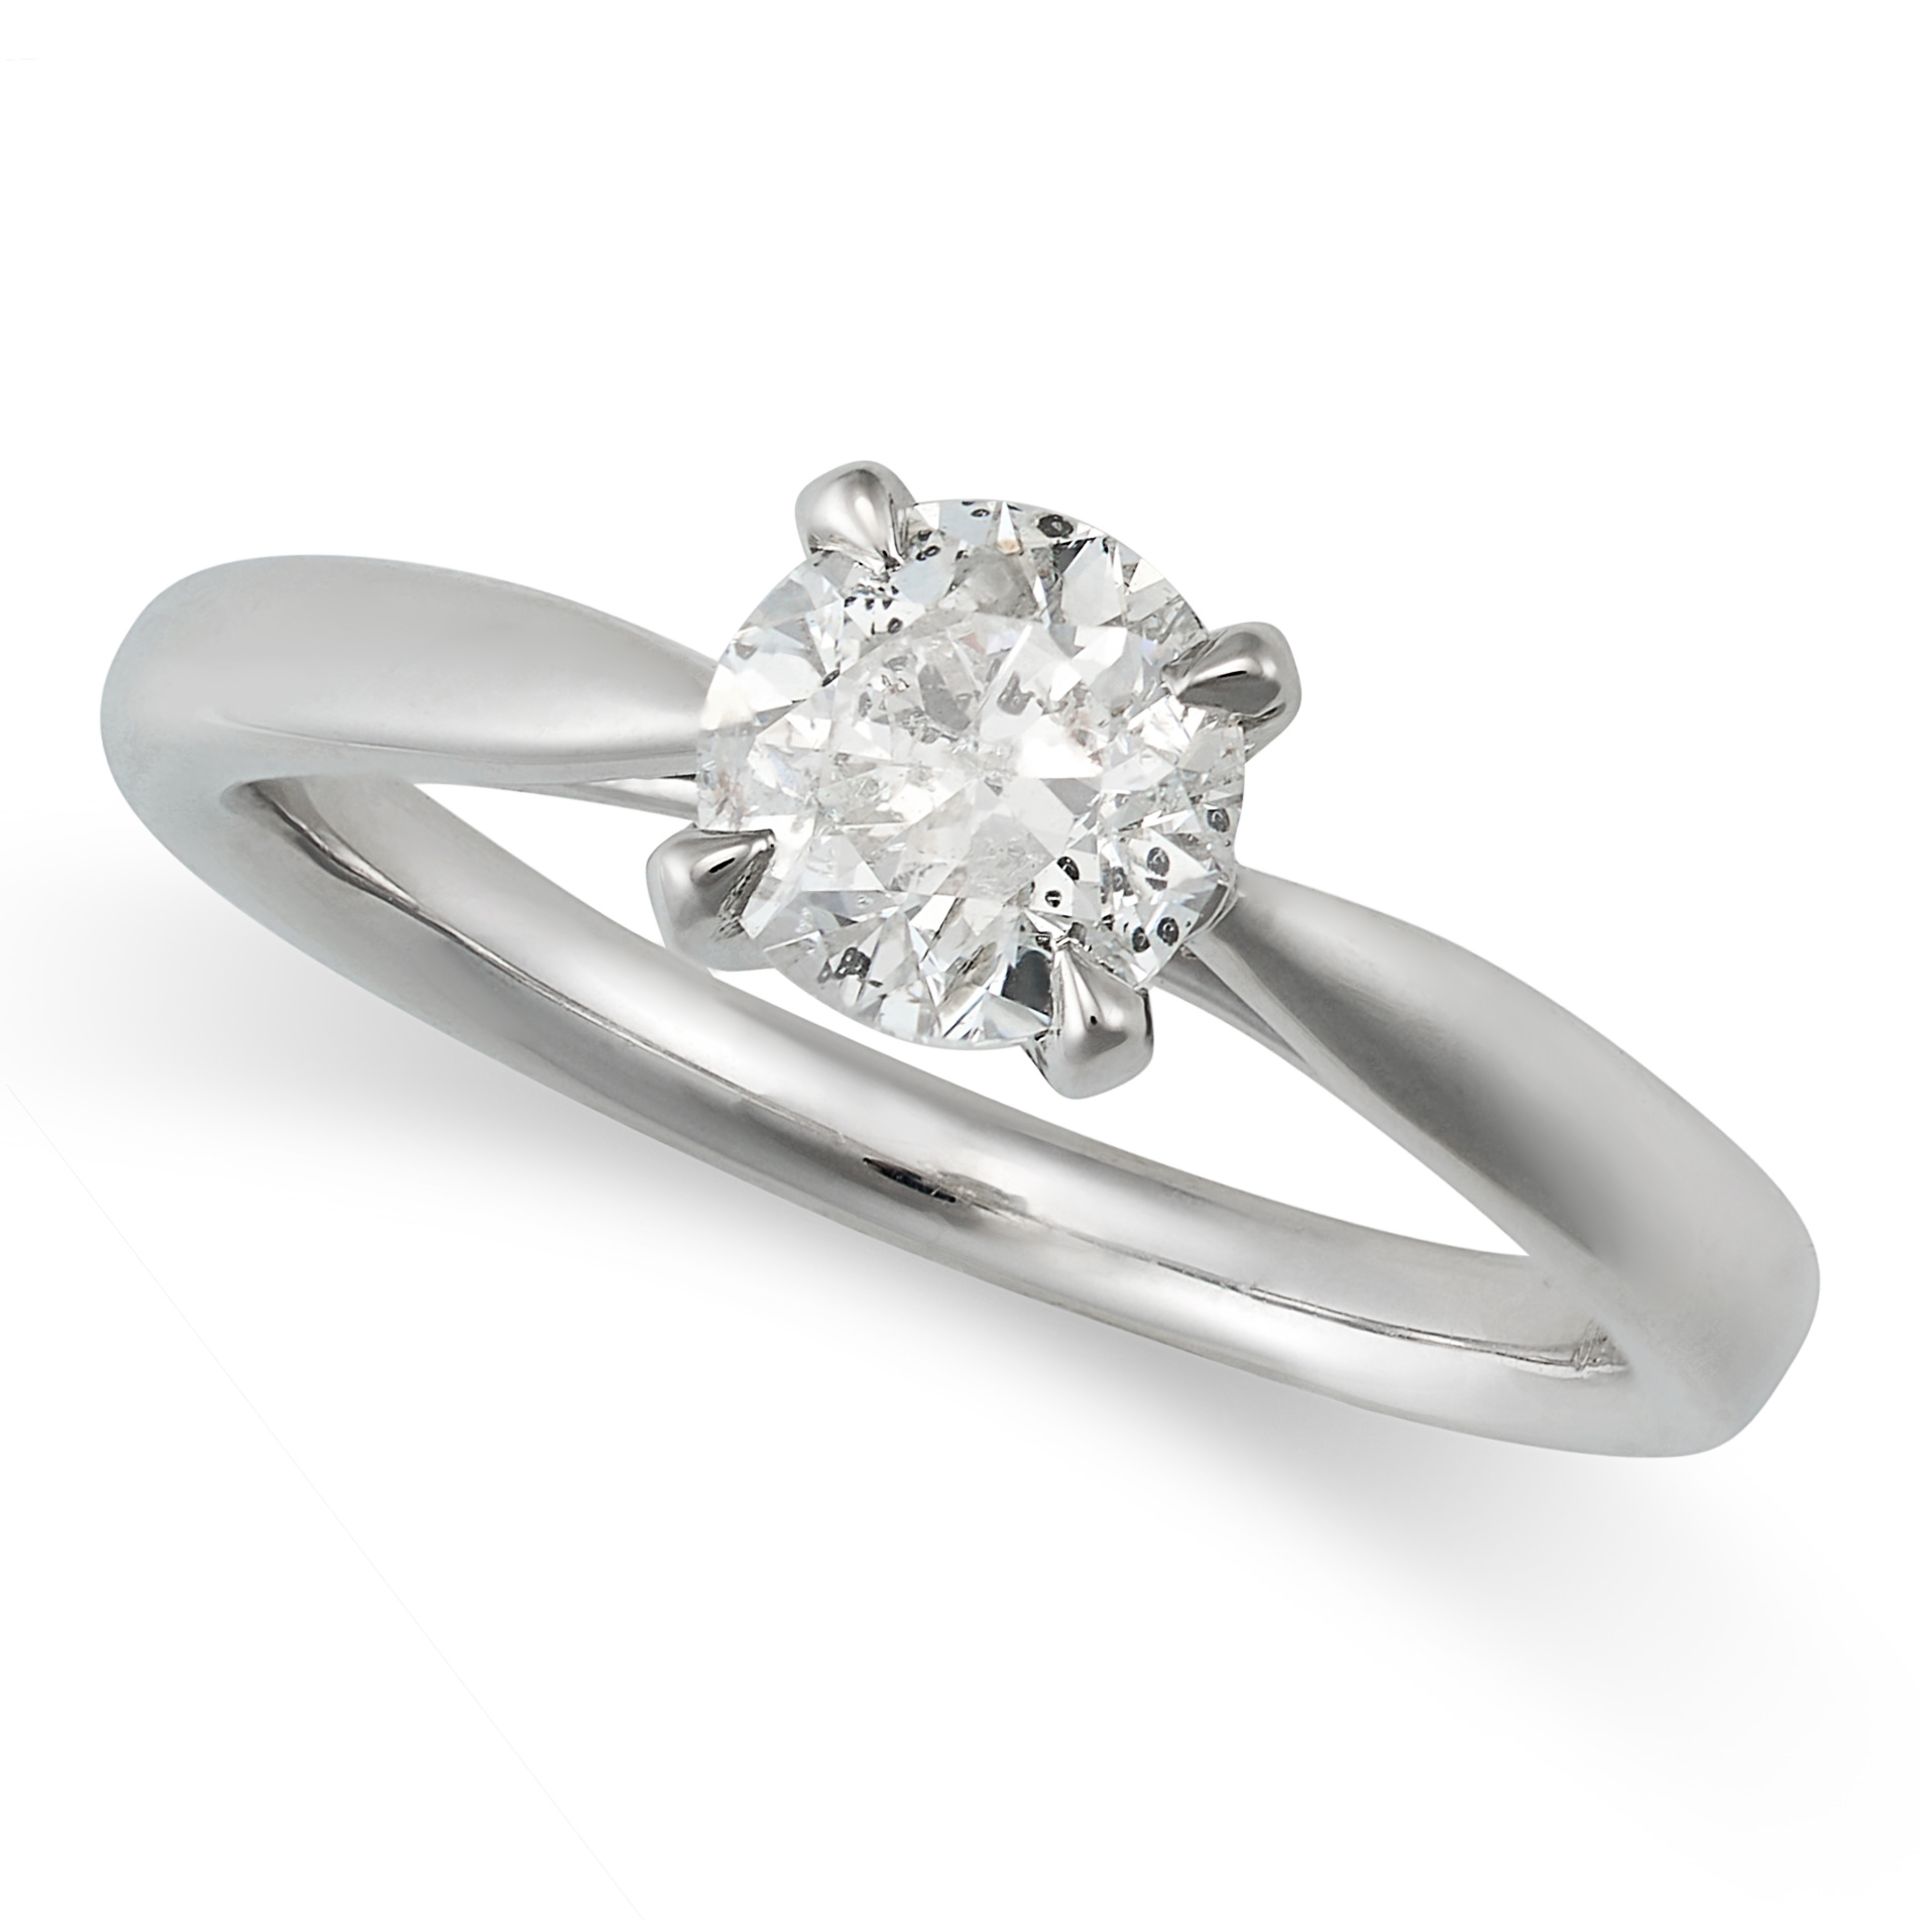 A SOLITAIRE DIAMOND ENGAGEMENT in platinum, set with a round brilliant cut diamond of 0.96 carats...